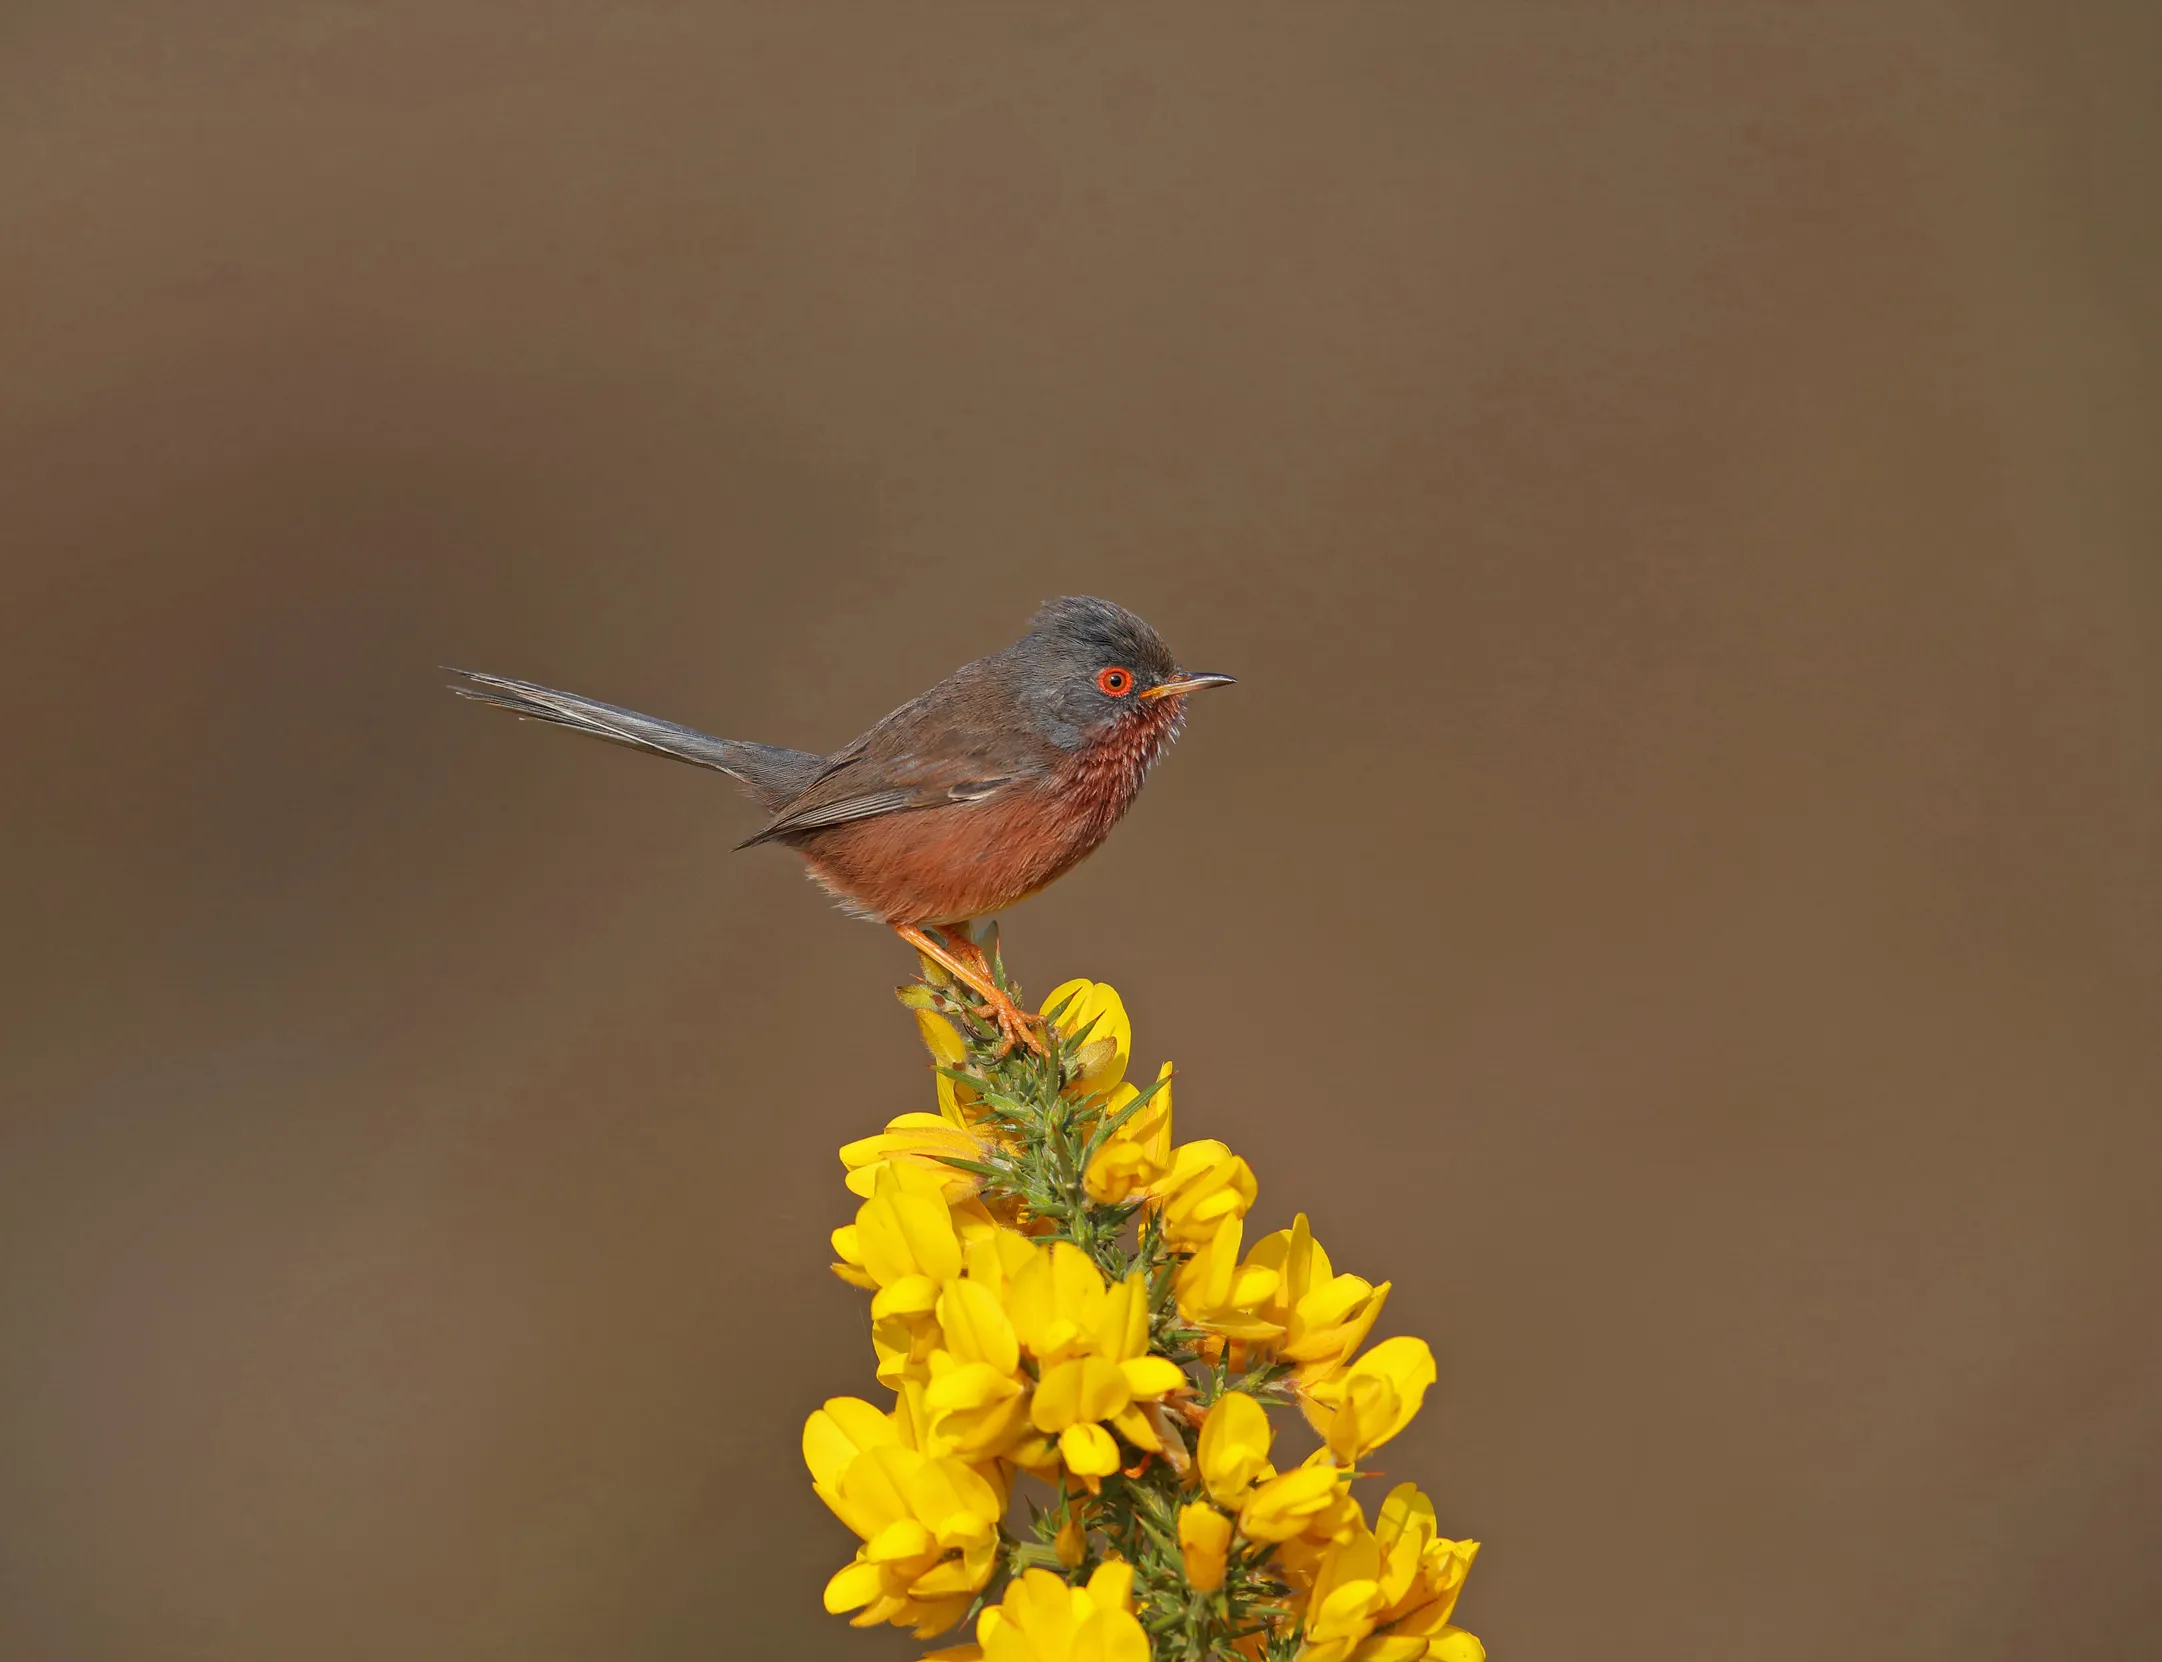 Lone Dartford Warbler, perched on a stem of yellow gorse